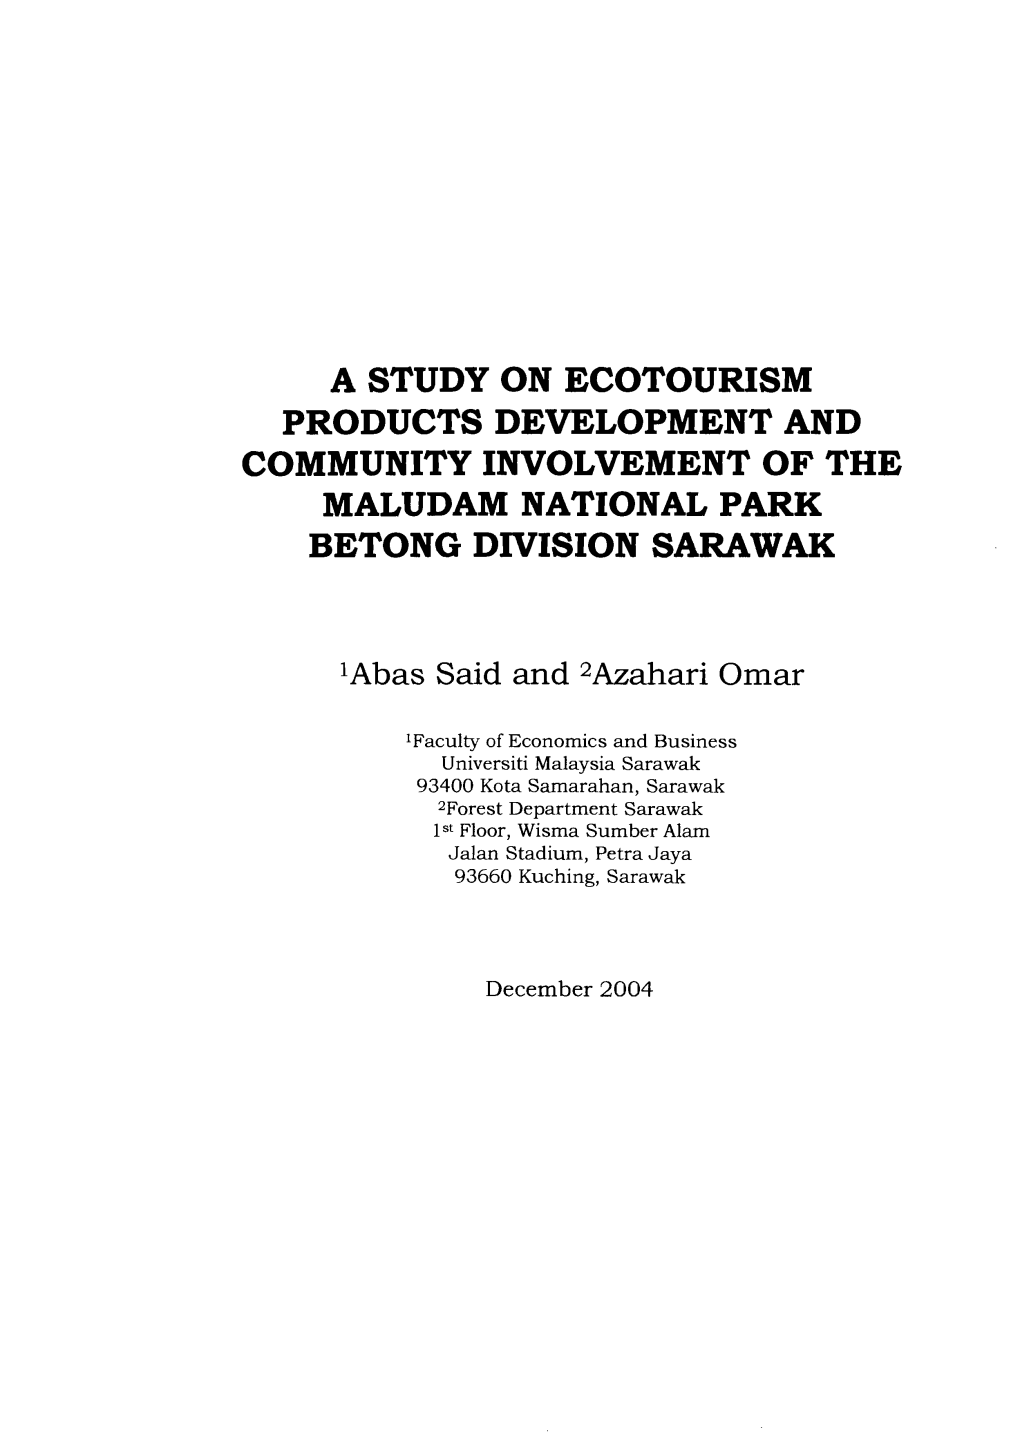 A Study on Ecotourism Products Development and Community Involvement of the Maludam National Park Betong Division Sarawak